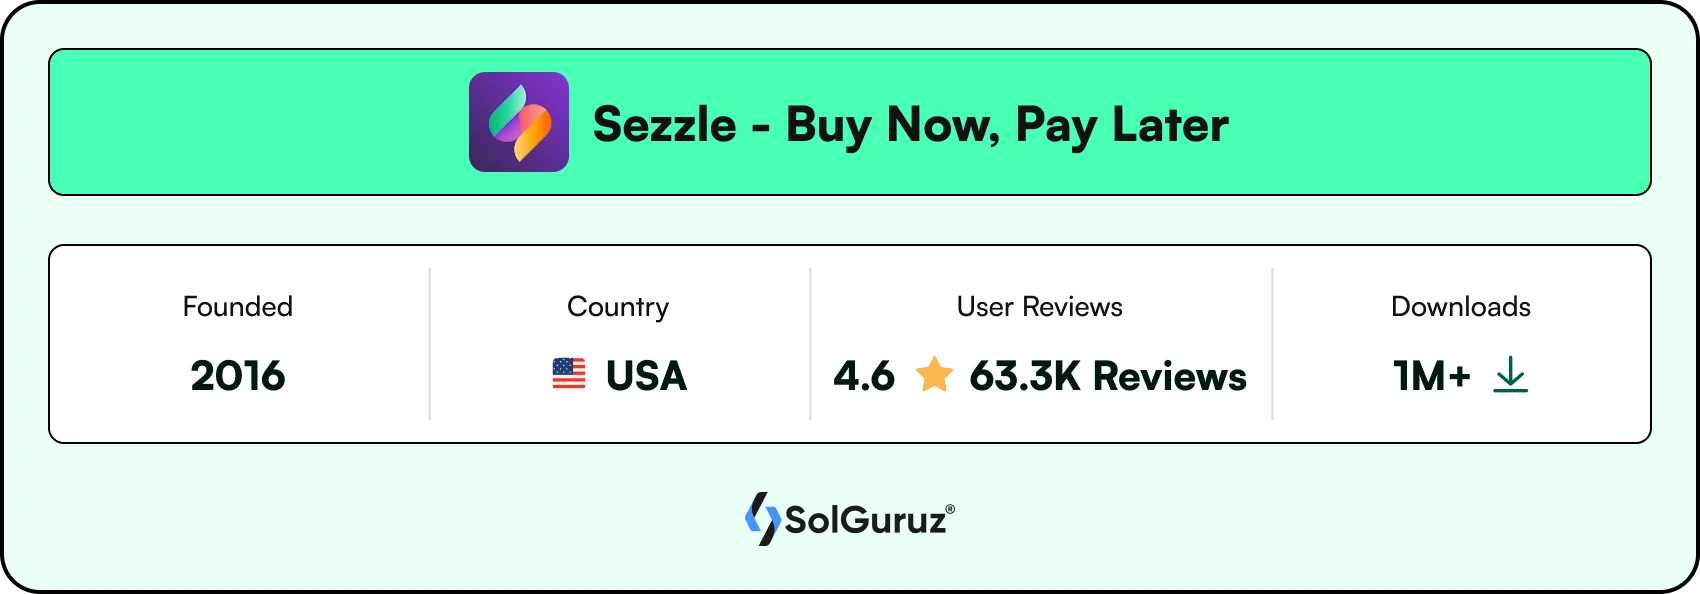 Sezzle - Buy Now, Pay Later App